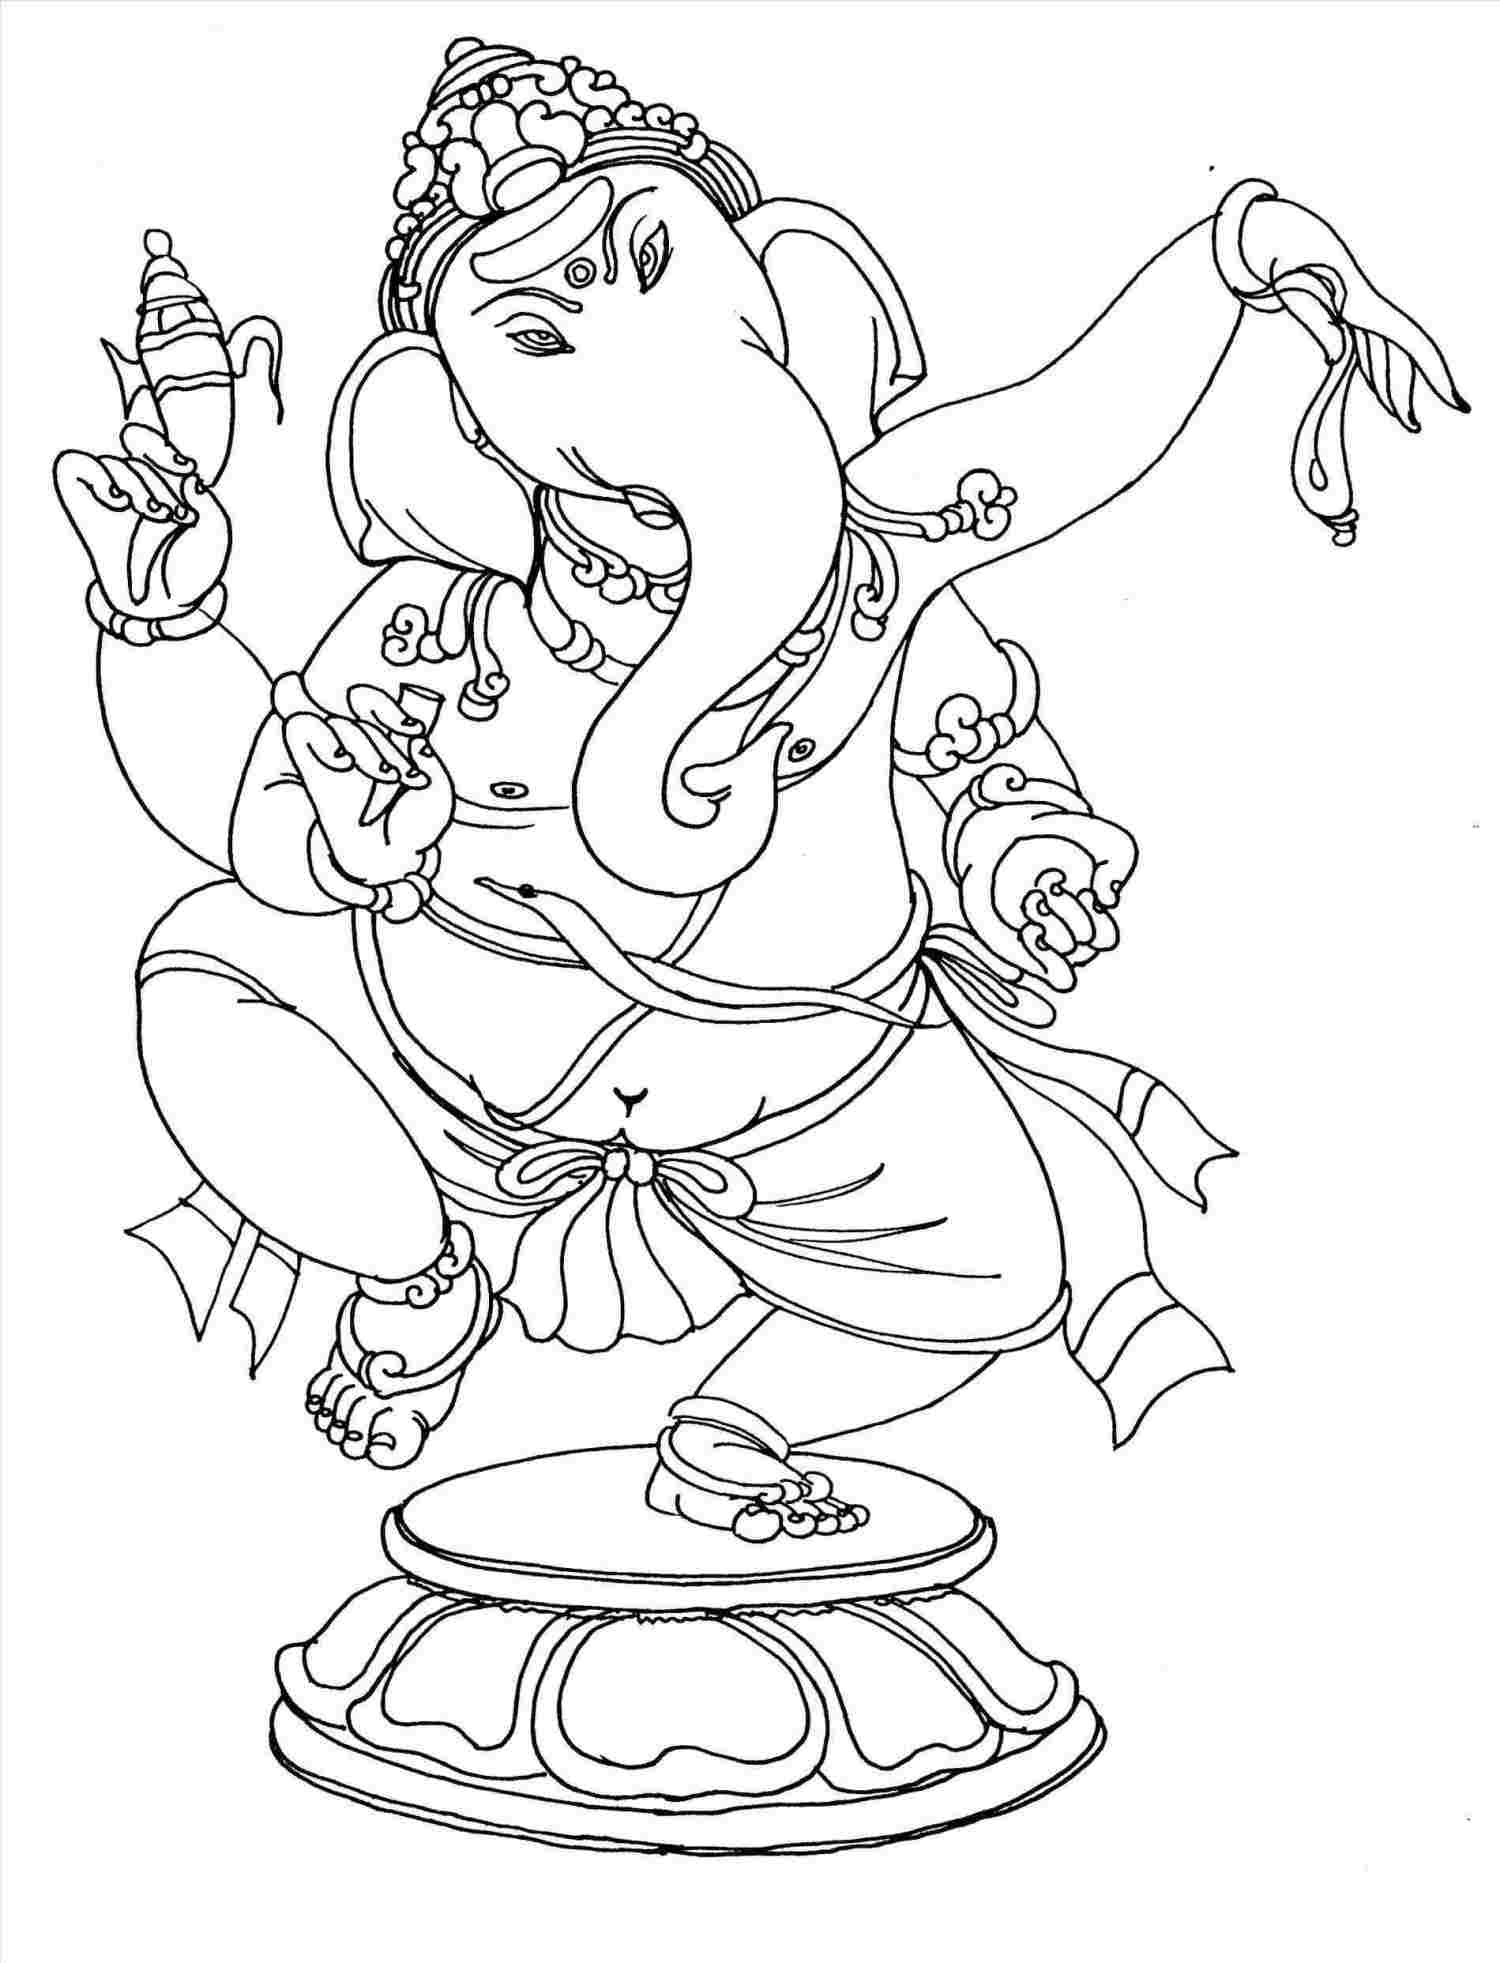 Outline Drawing Of Lord Ganesha at Explore